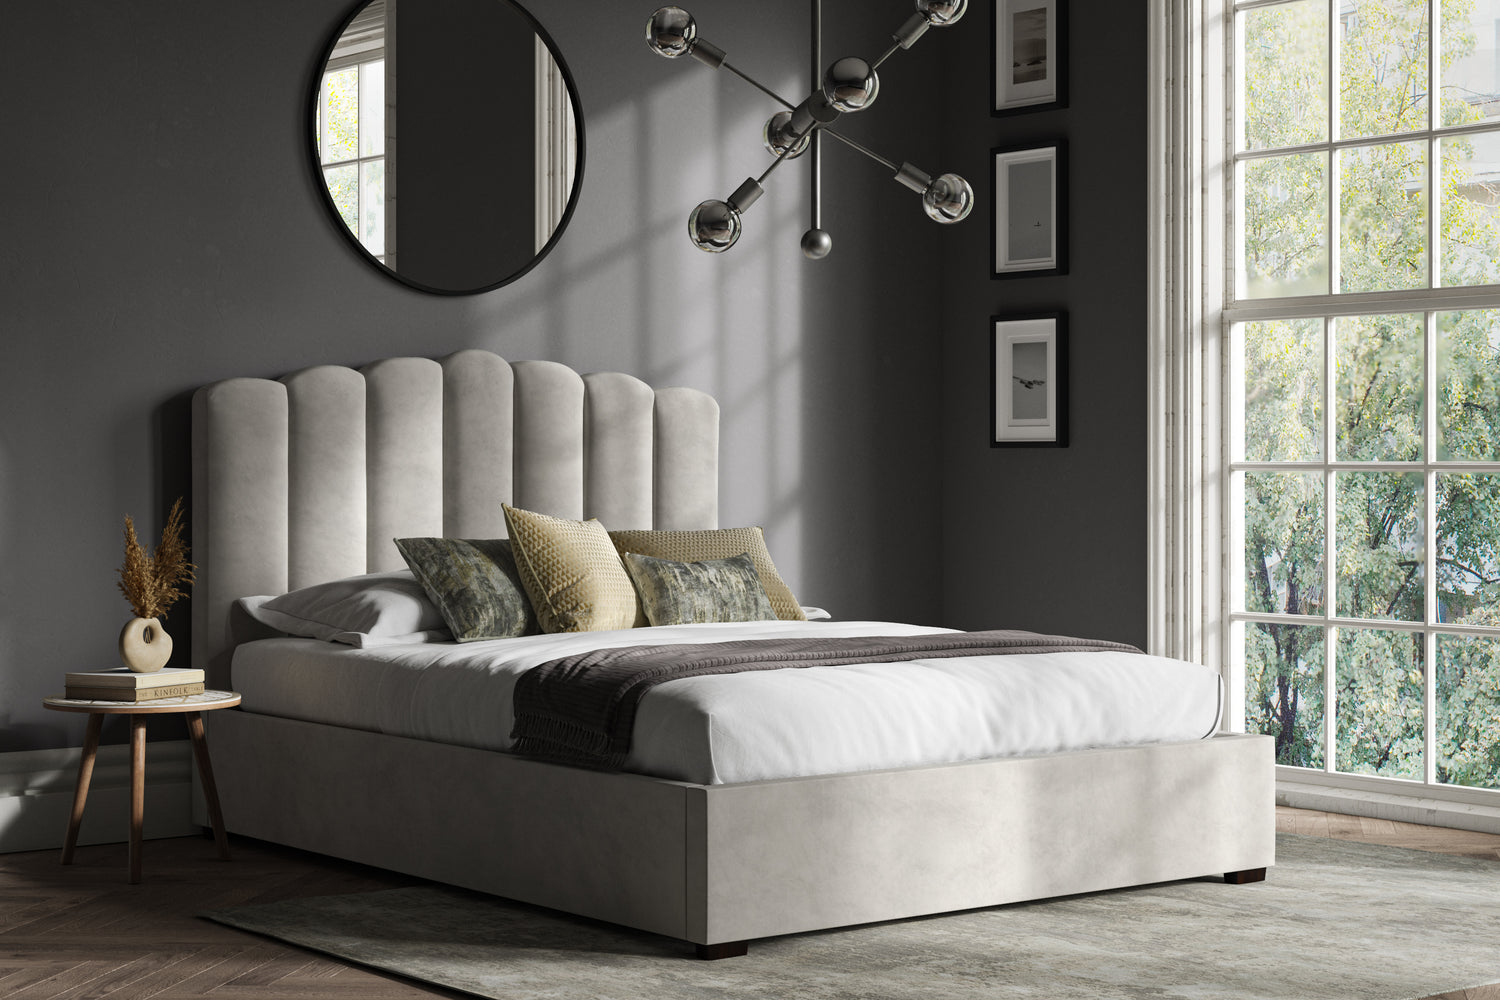 Emporia Beds Bradgate Ottoman bed-Better Bed Company